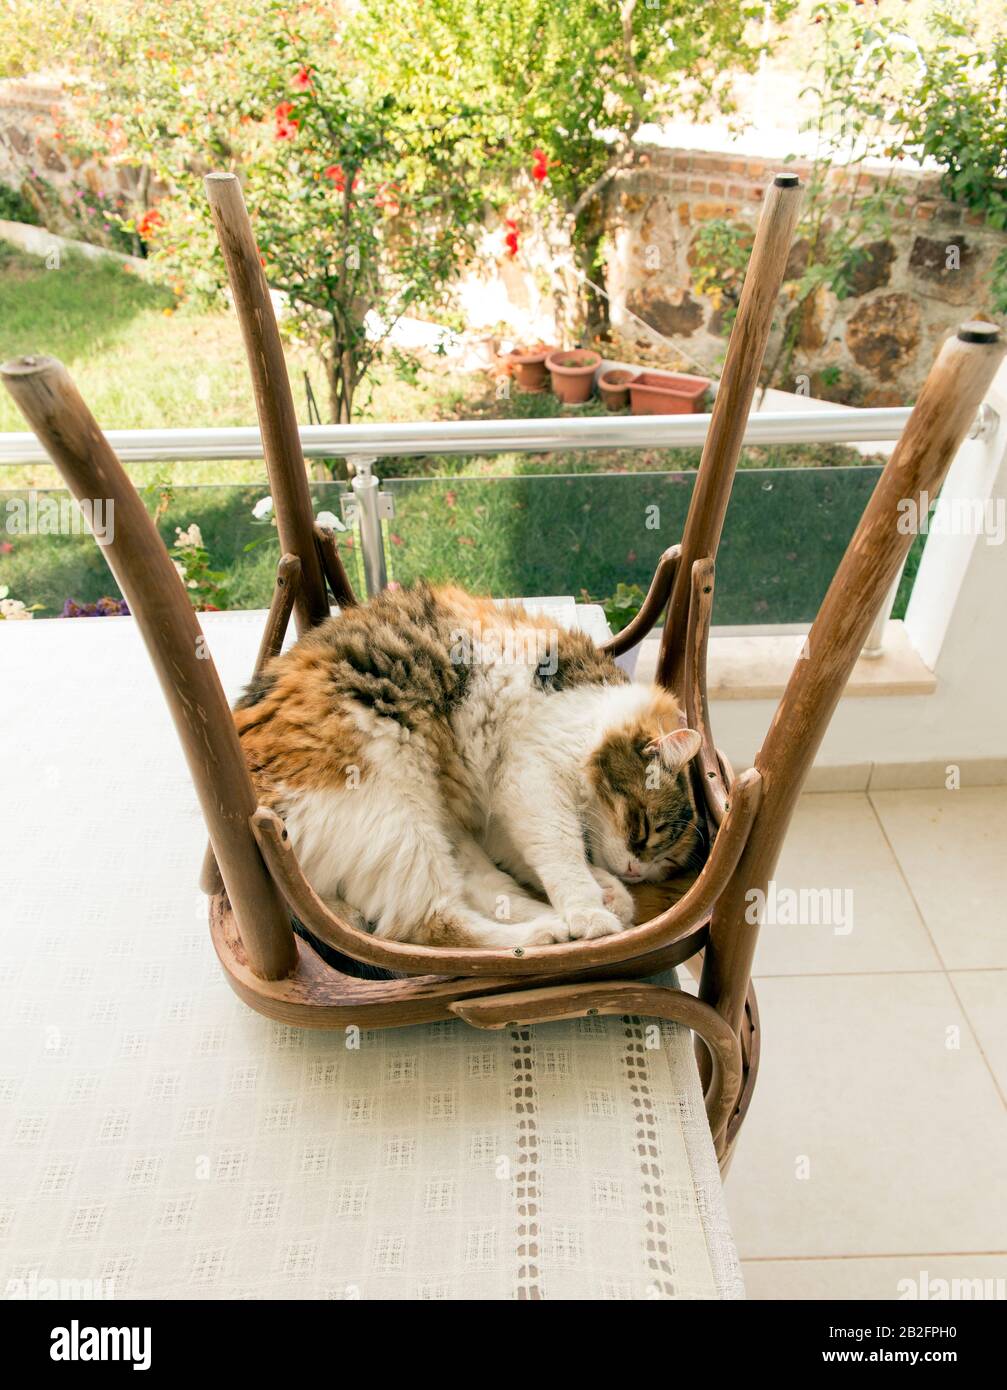 Central perspective image of a cute adult calico cat sleeps inside an upside-down turned rustic chair. Stock Photo